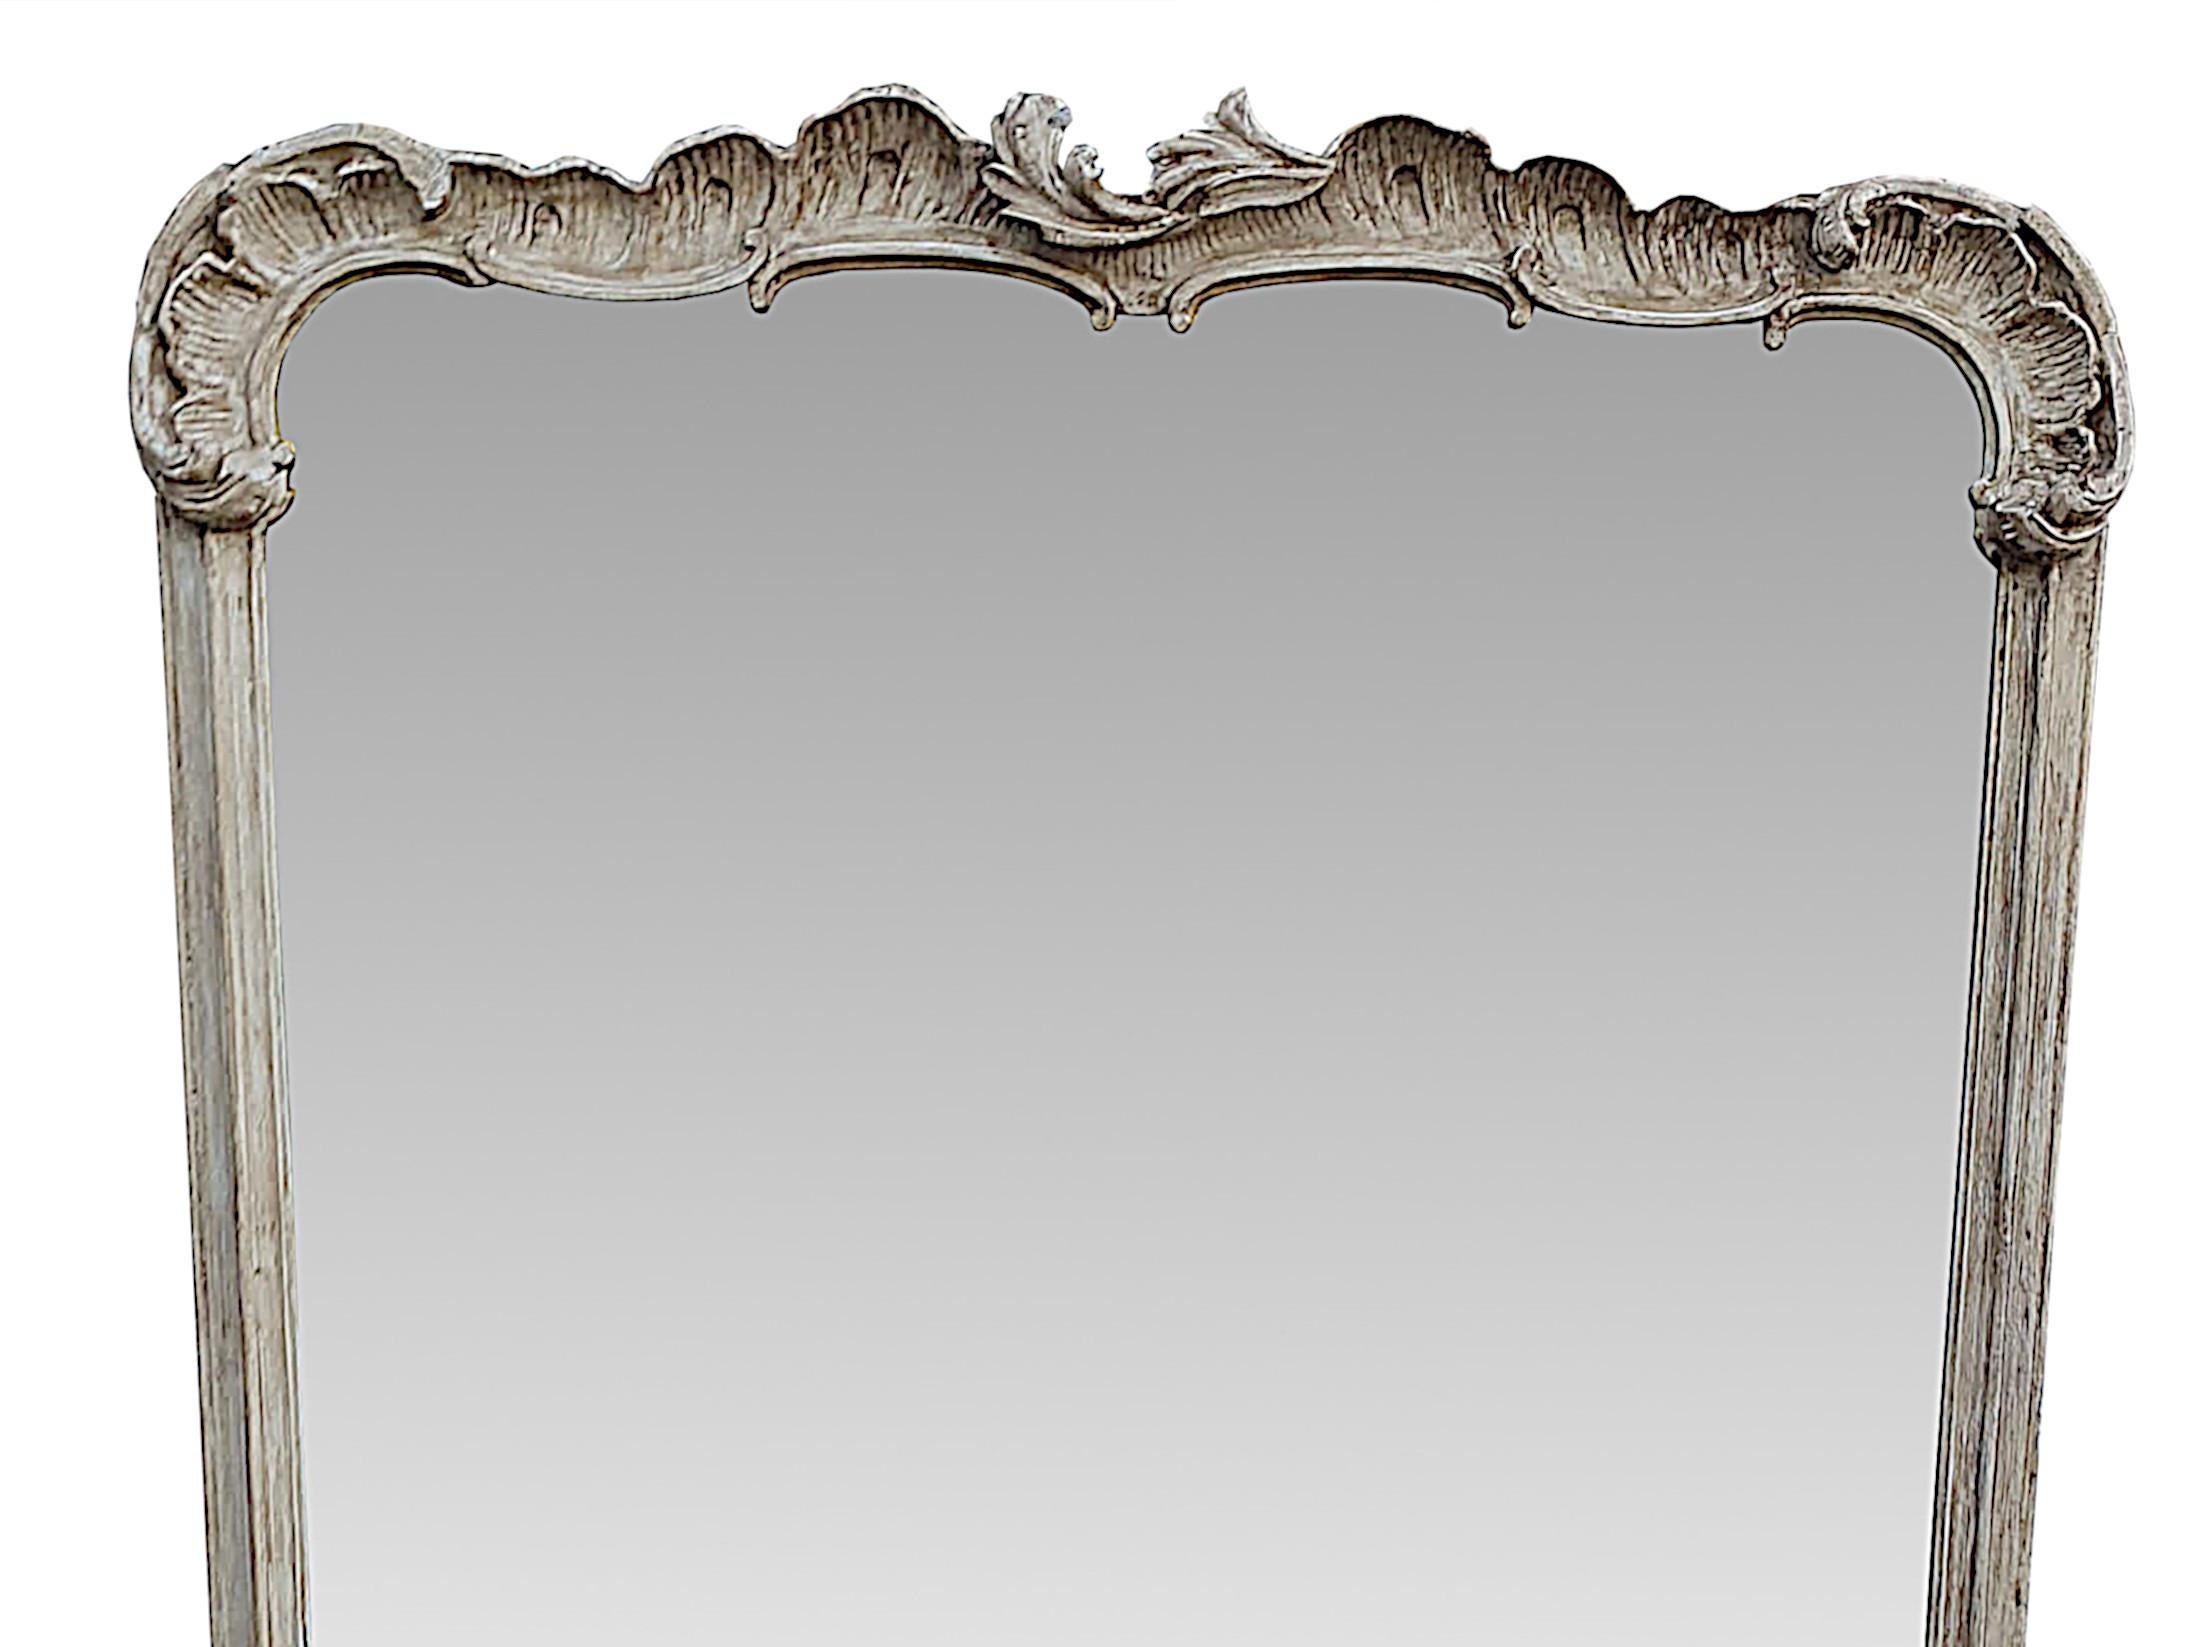 A fabulous large early 19th century overmantle mirror with a gorgeous, distressed painted finish. The mirror glass plate of rectangular form is set within a hand carved frame surmounted with beautifully detailed c scrolls and ruffles with centred